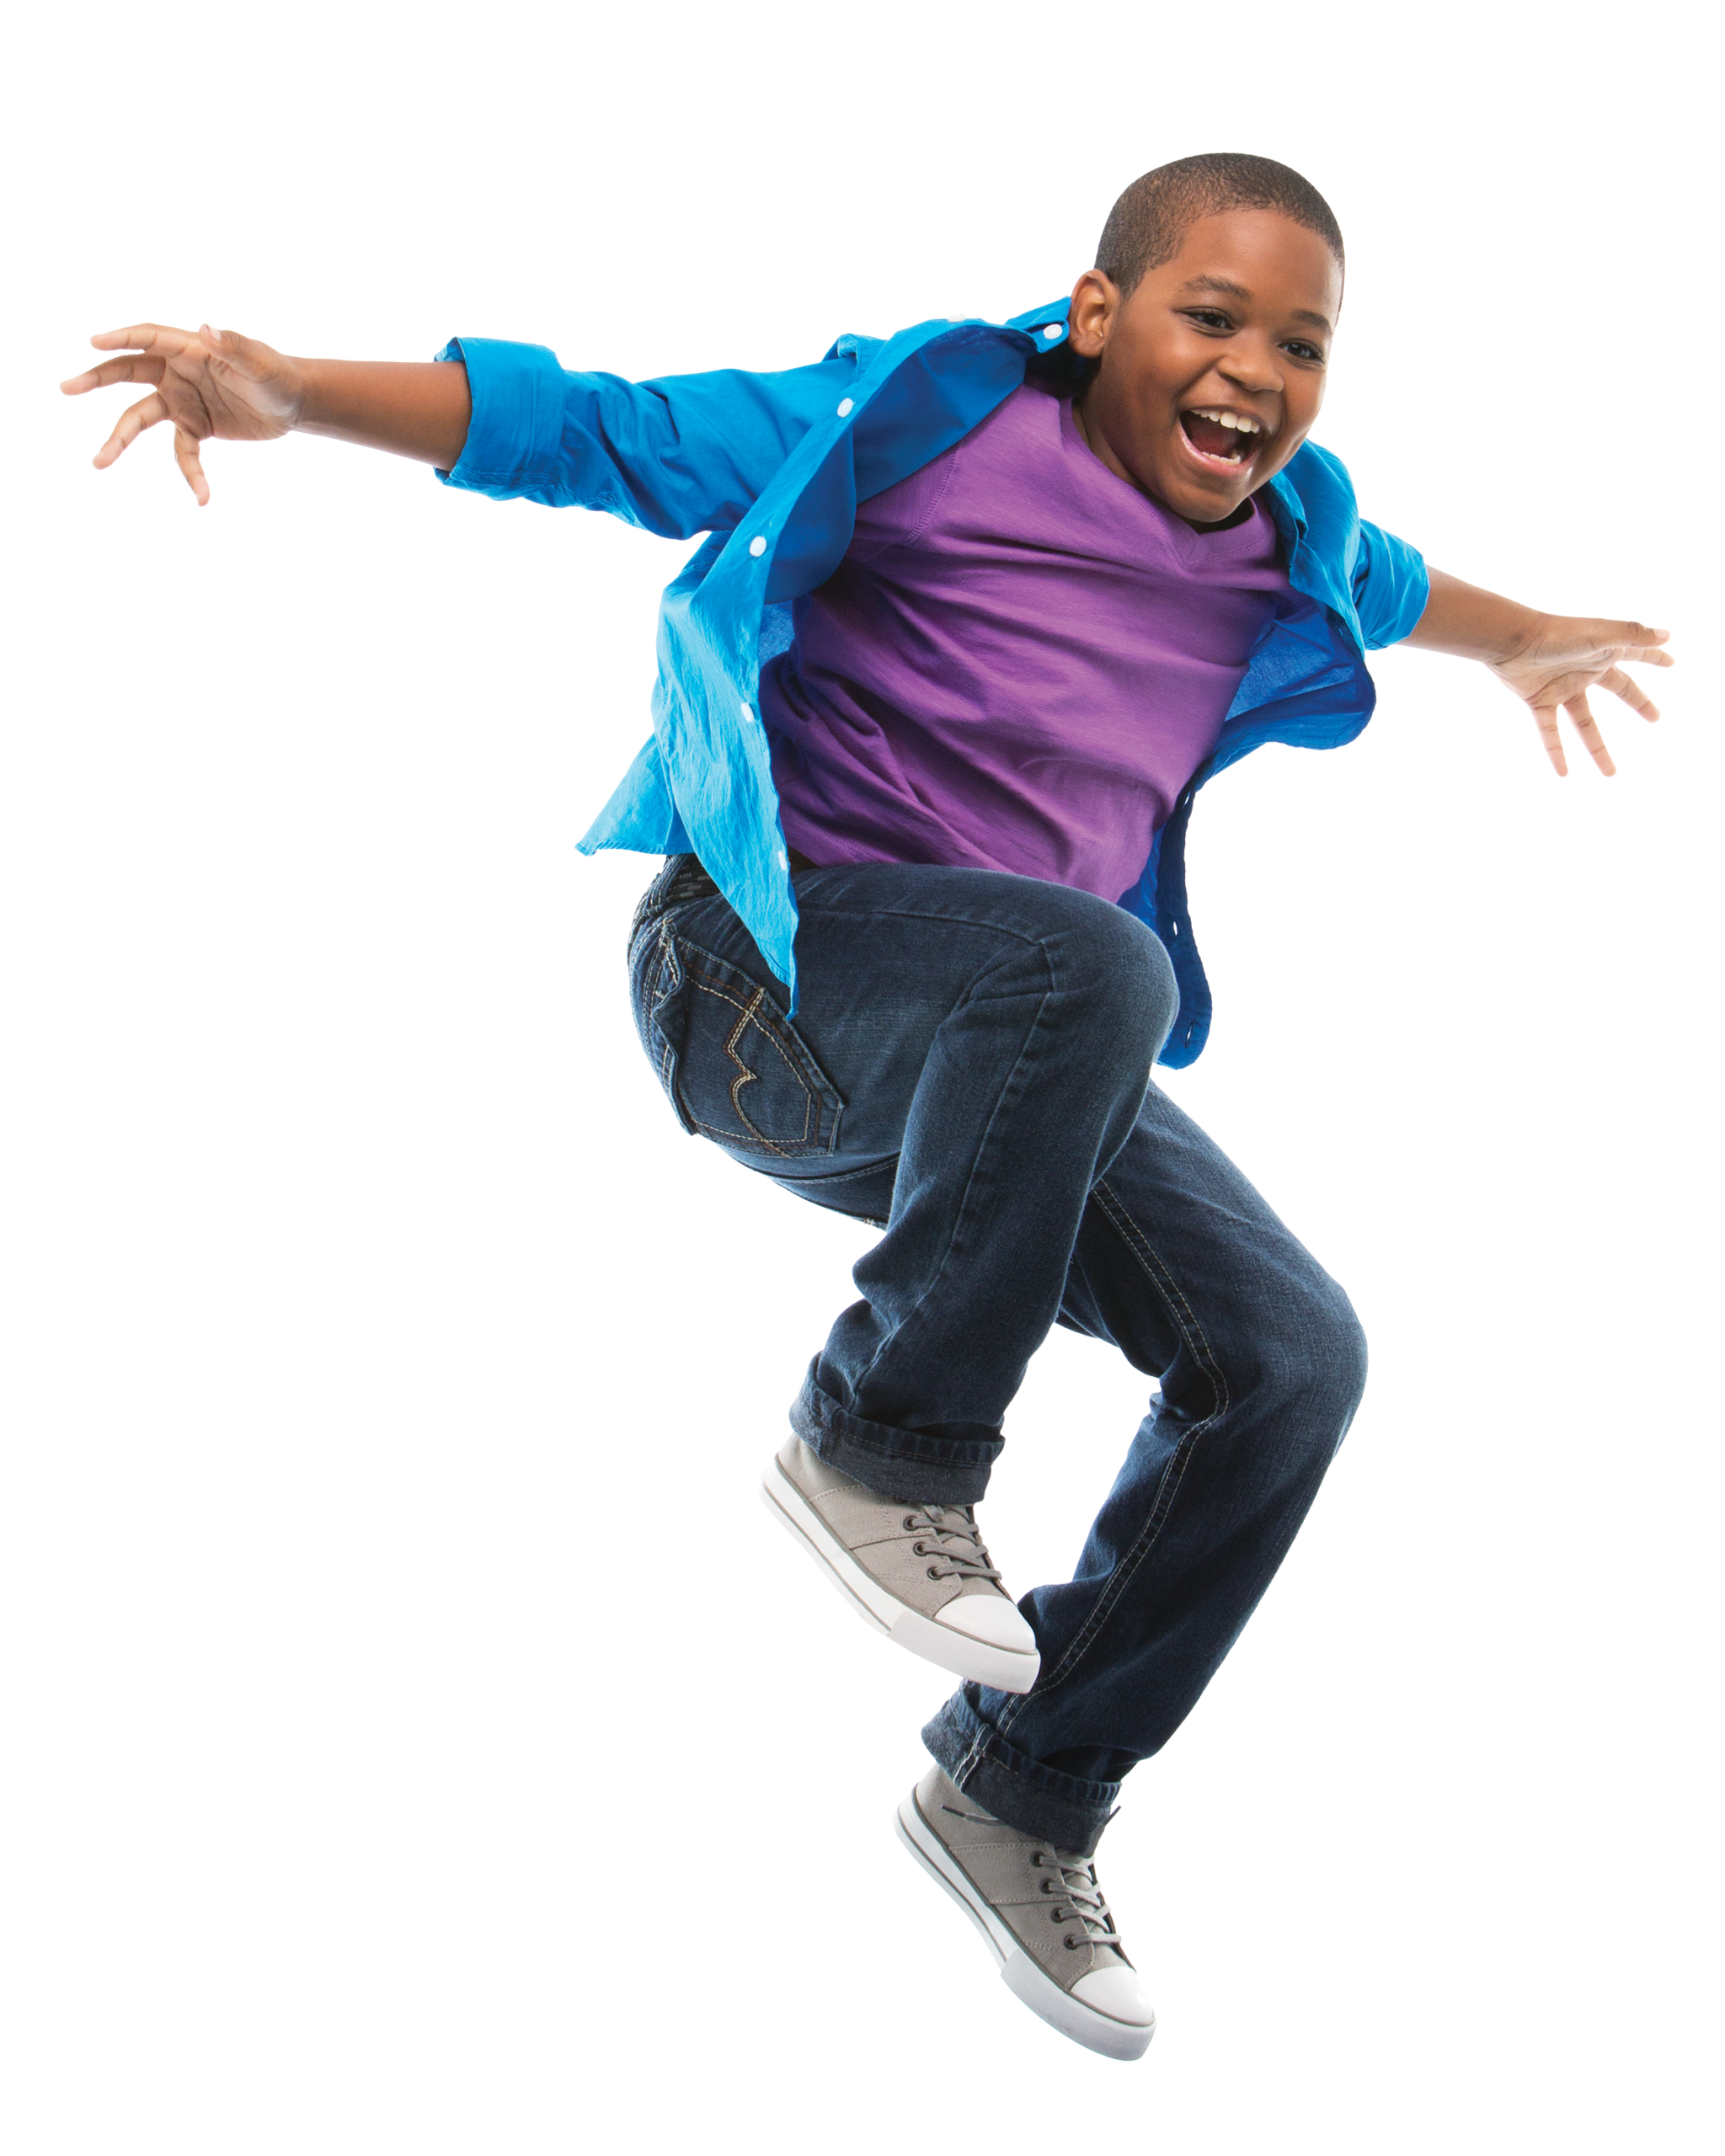 Young boy jumping into the air.